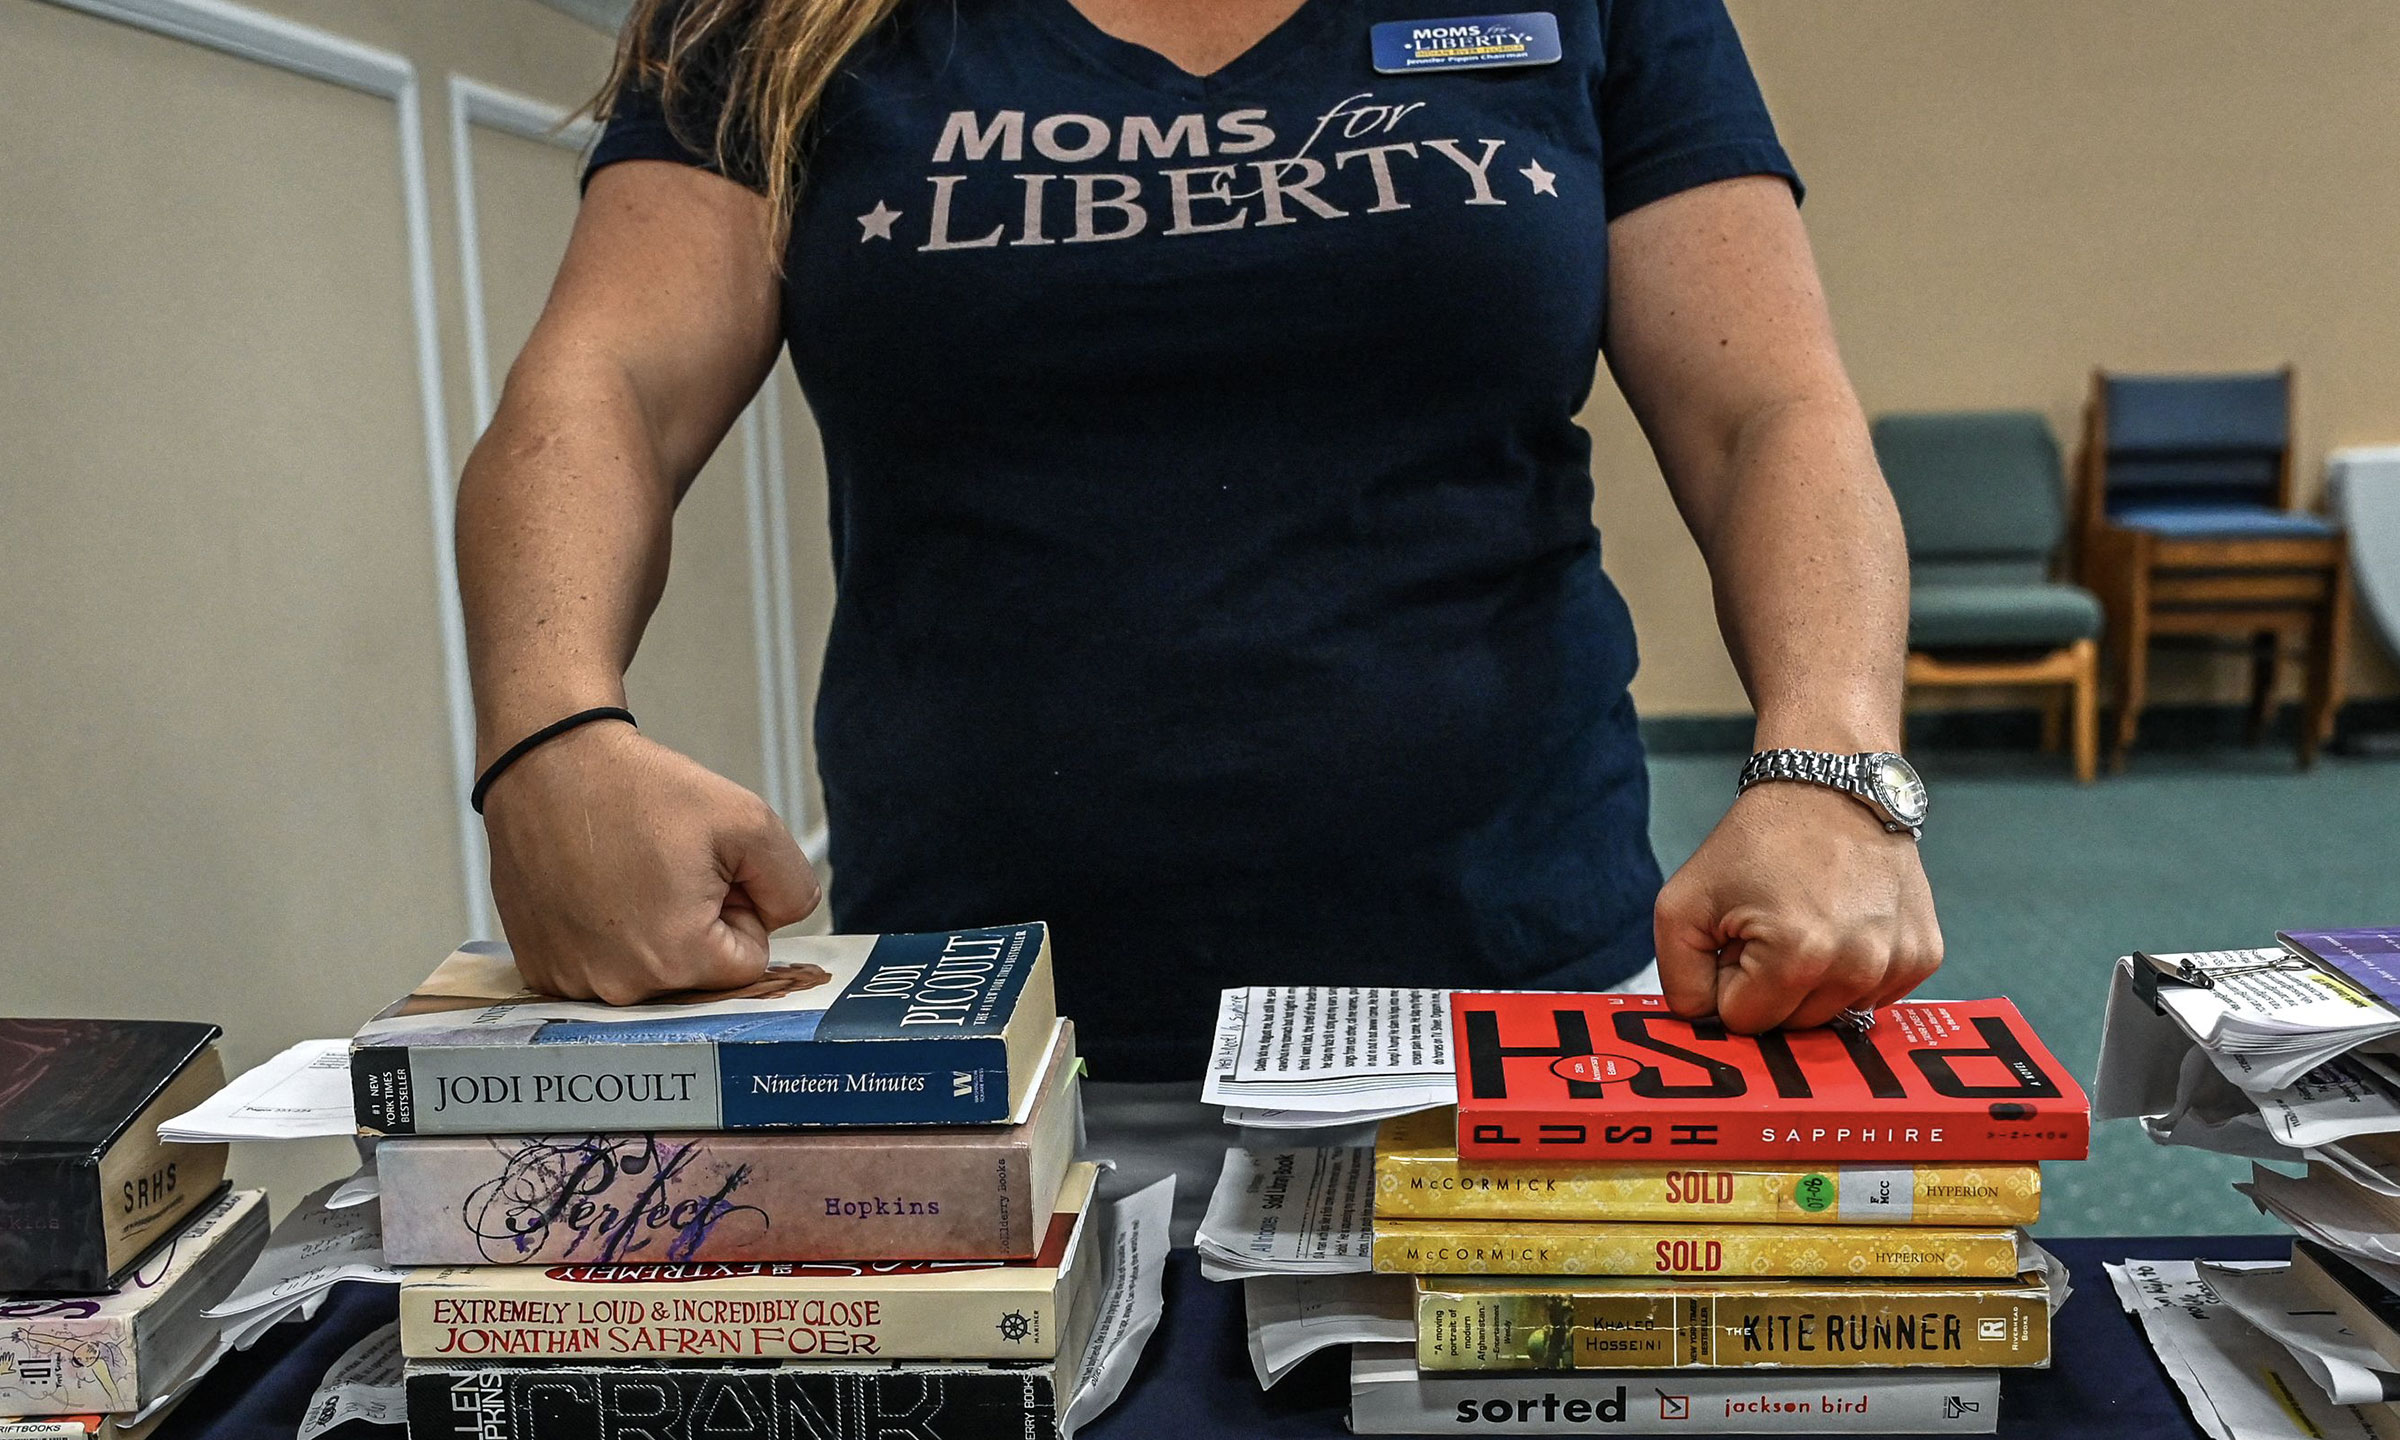 This is a photo of a Moms for Liberty member standing in front of a stack of books.